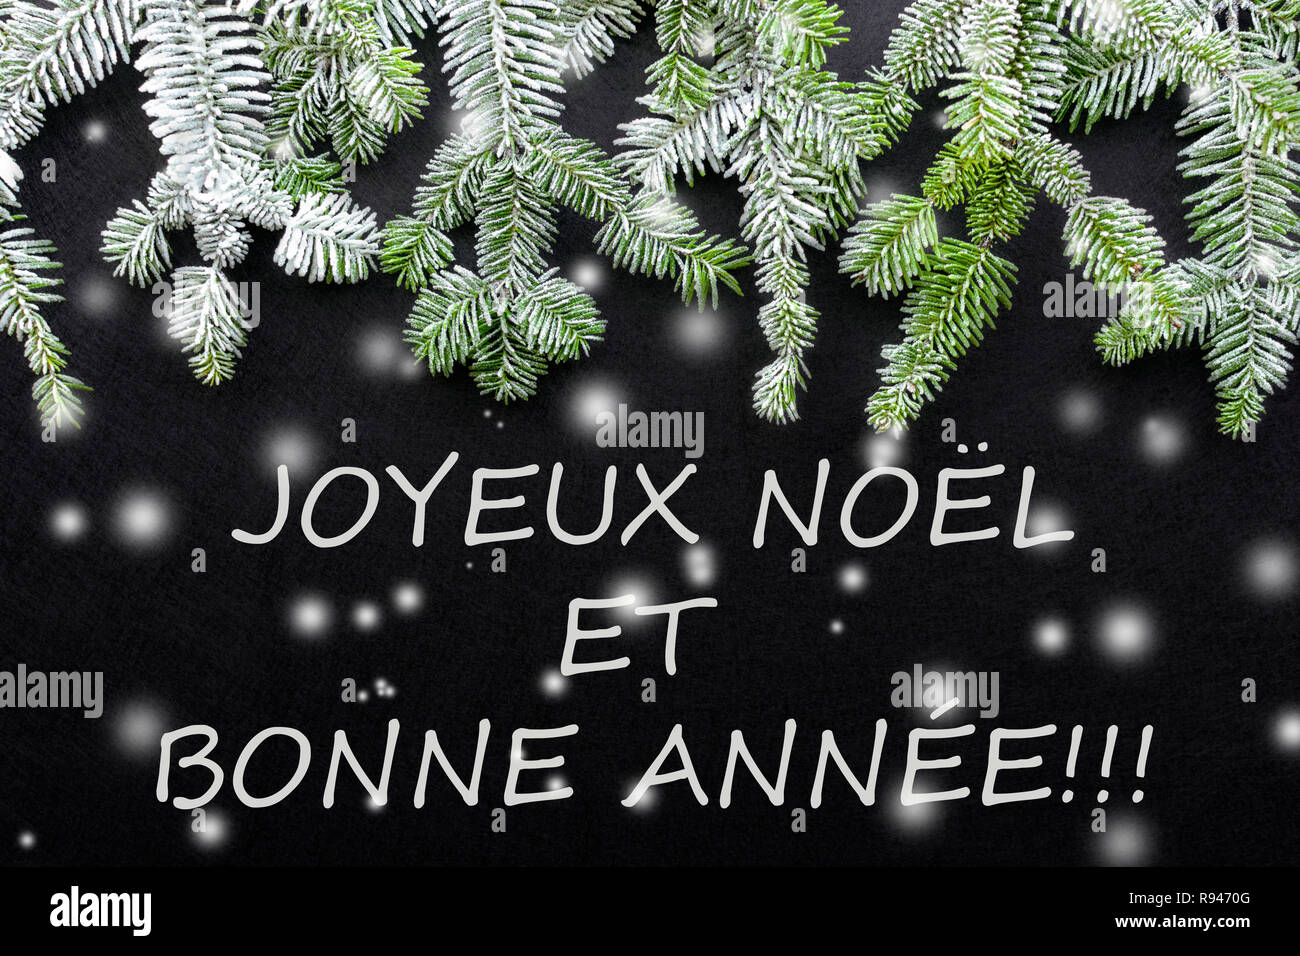 Fir tree and snow on dark background. Greetings Christmas card. Postcard. Christmastime. White and green."Joyeux Noël" Stock Photo